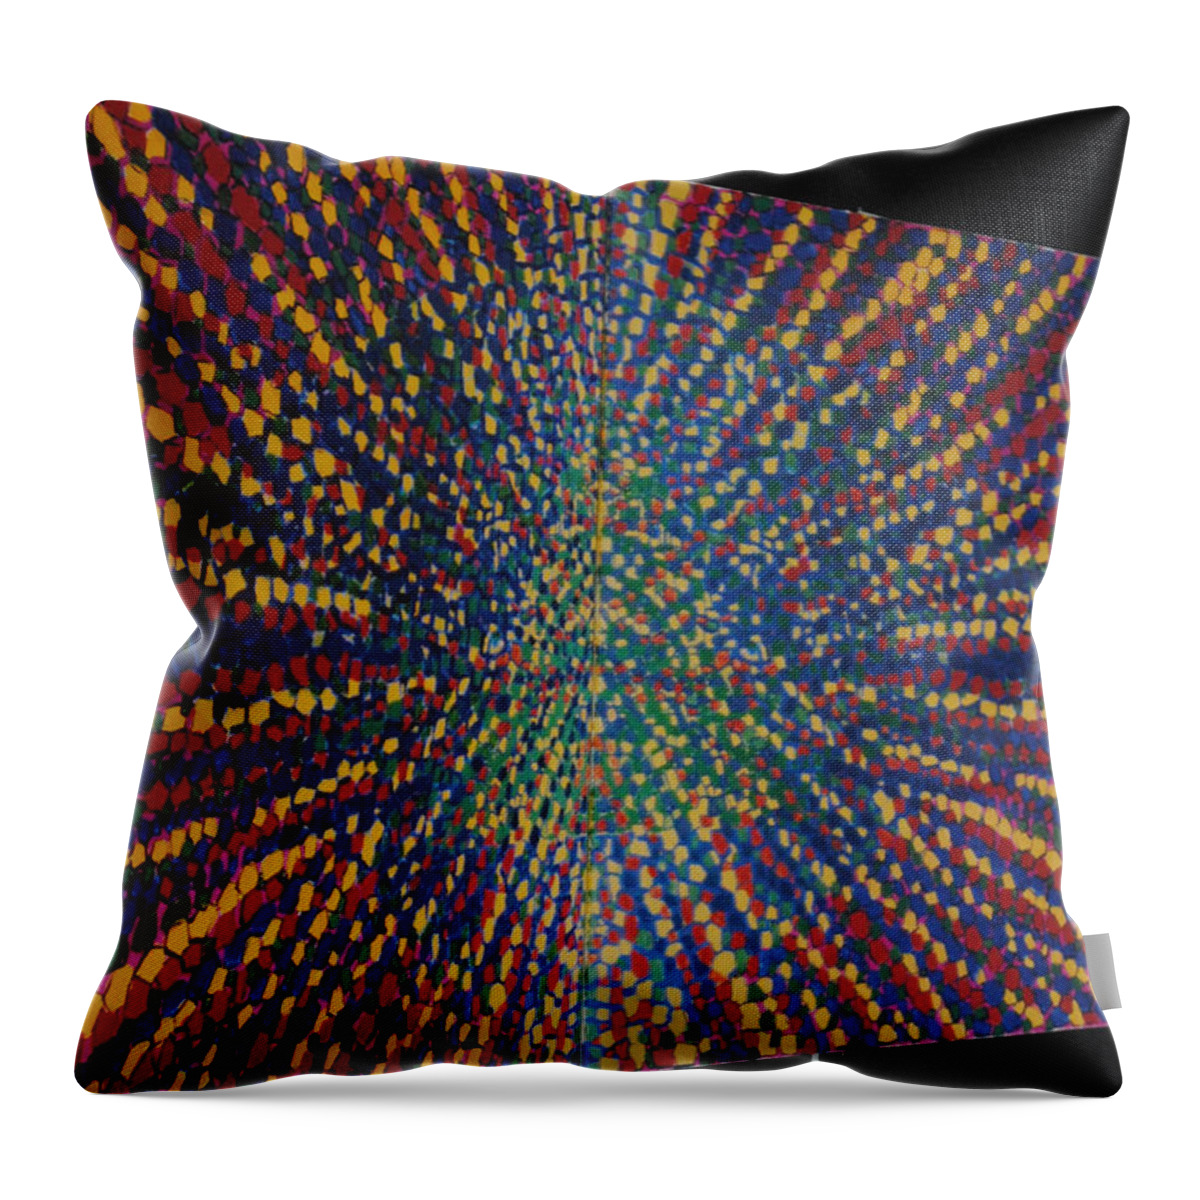 Inspirational Throw Pillow featuring the painting Butterfly Dream #3 by Kyung Hee Hogg